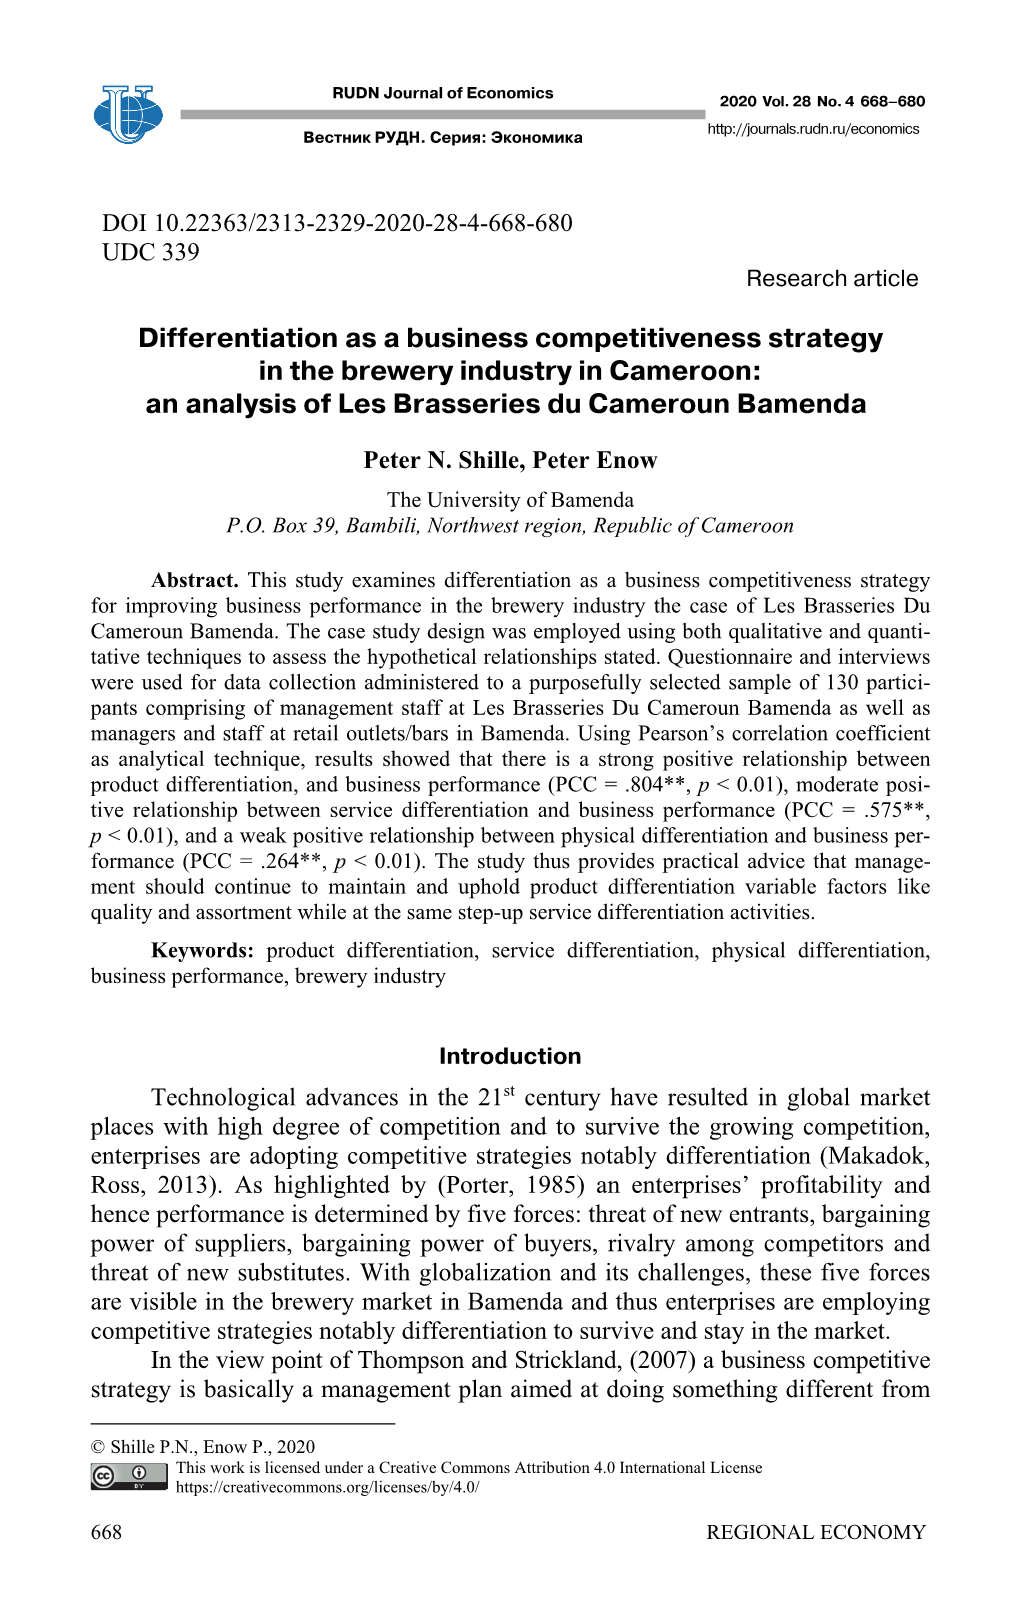 Differentiation As a Business Competitiveness Strategy in the Brewery Industry in Cameroon: an Analysis of Les Brasseries Du Cameroun Bamenda1